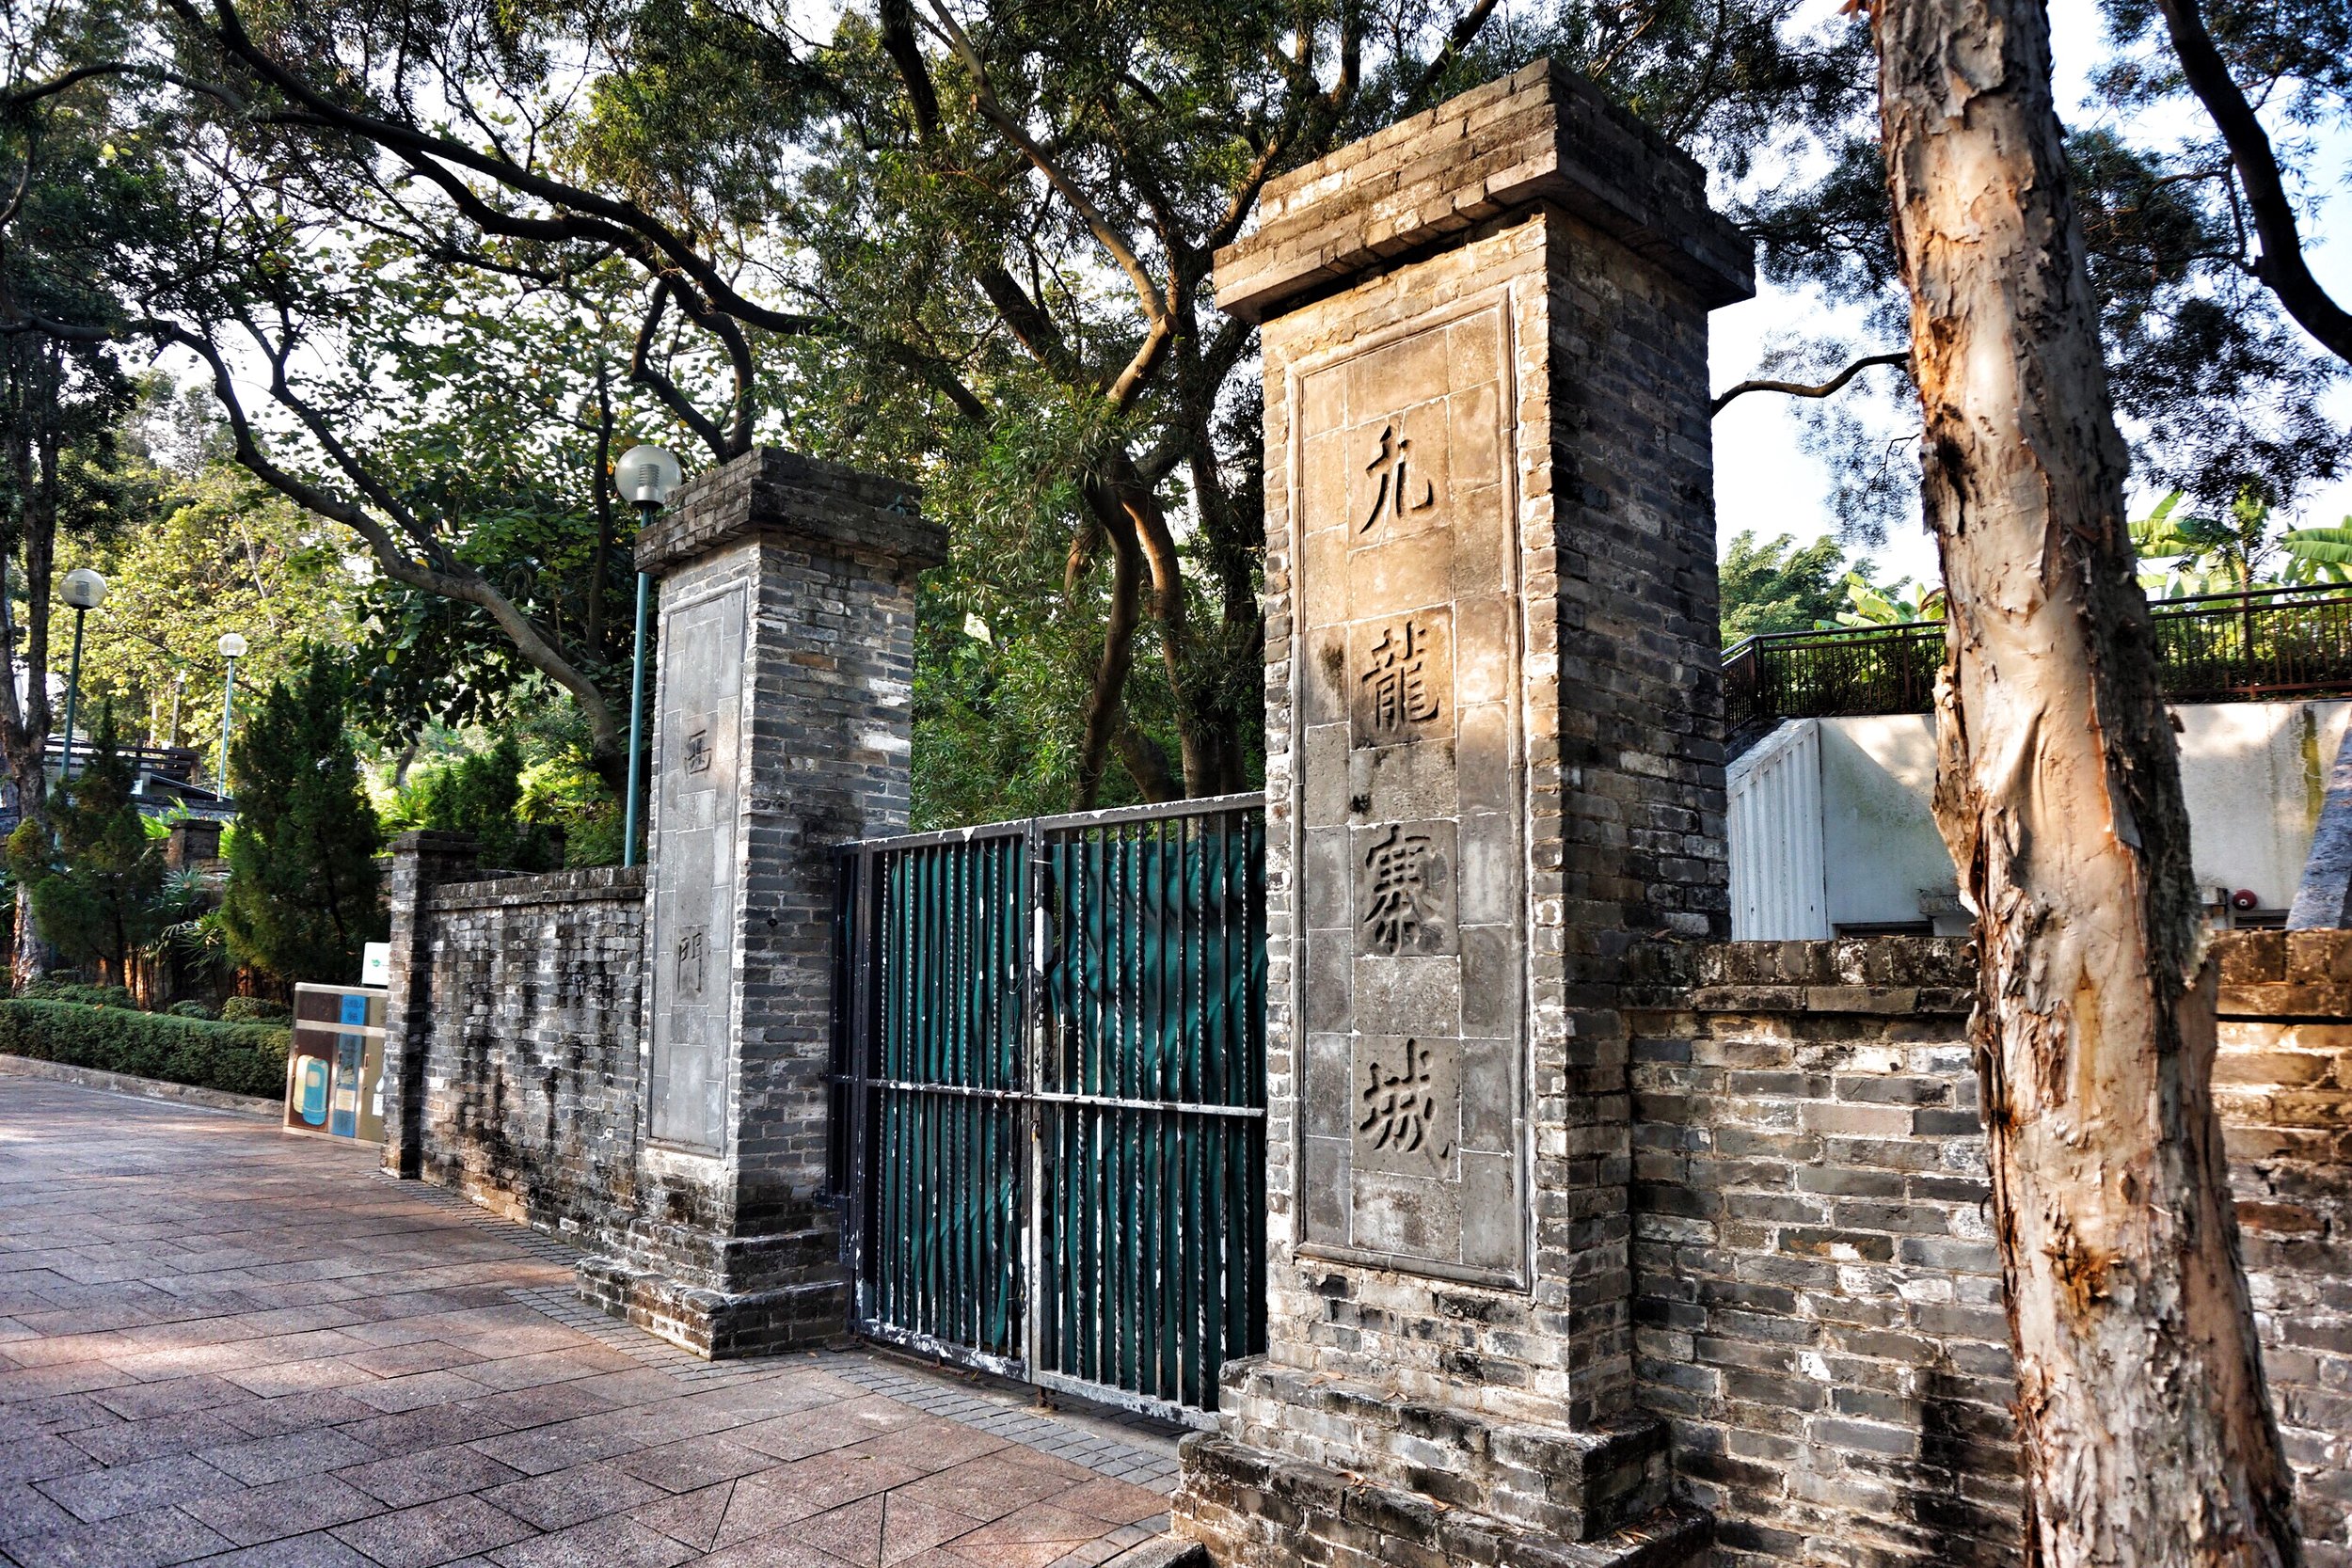 The original wall to the Kowloon Walled City was destroyed by the Japanese during the second world war. You will learn on your night tour what the wall was used for and how it was restored.